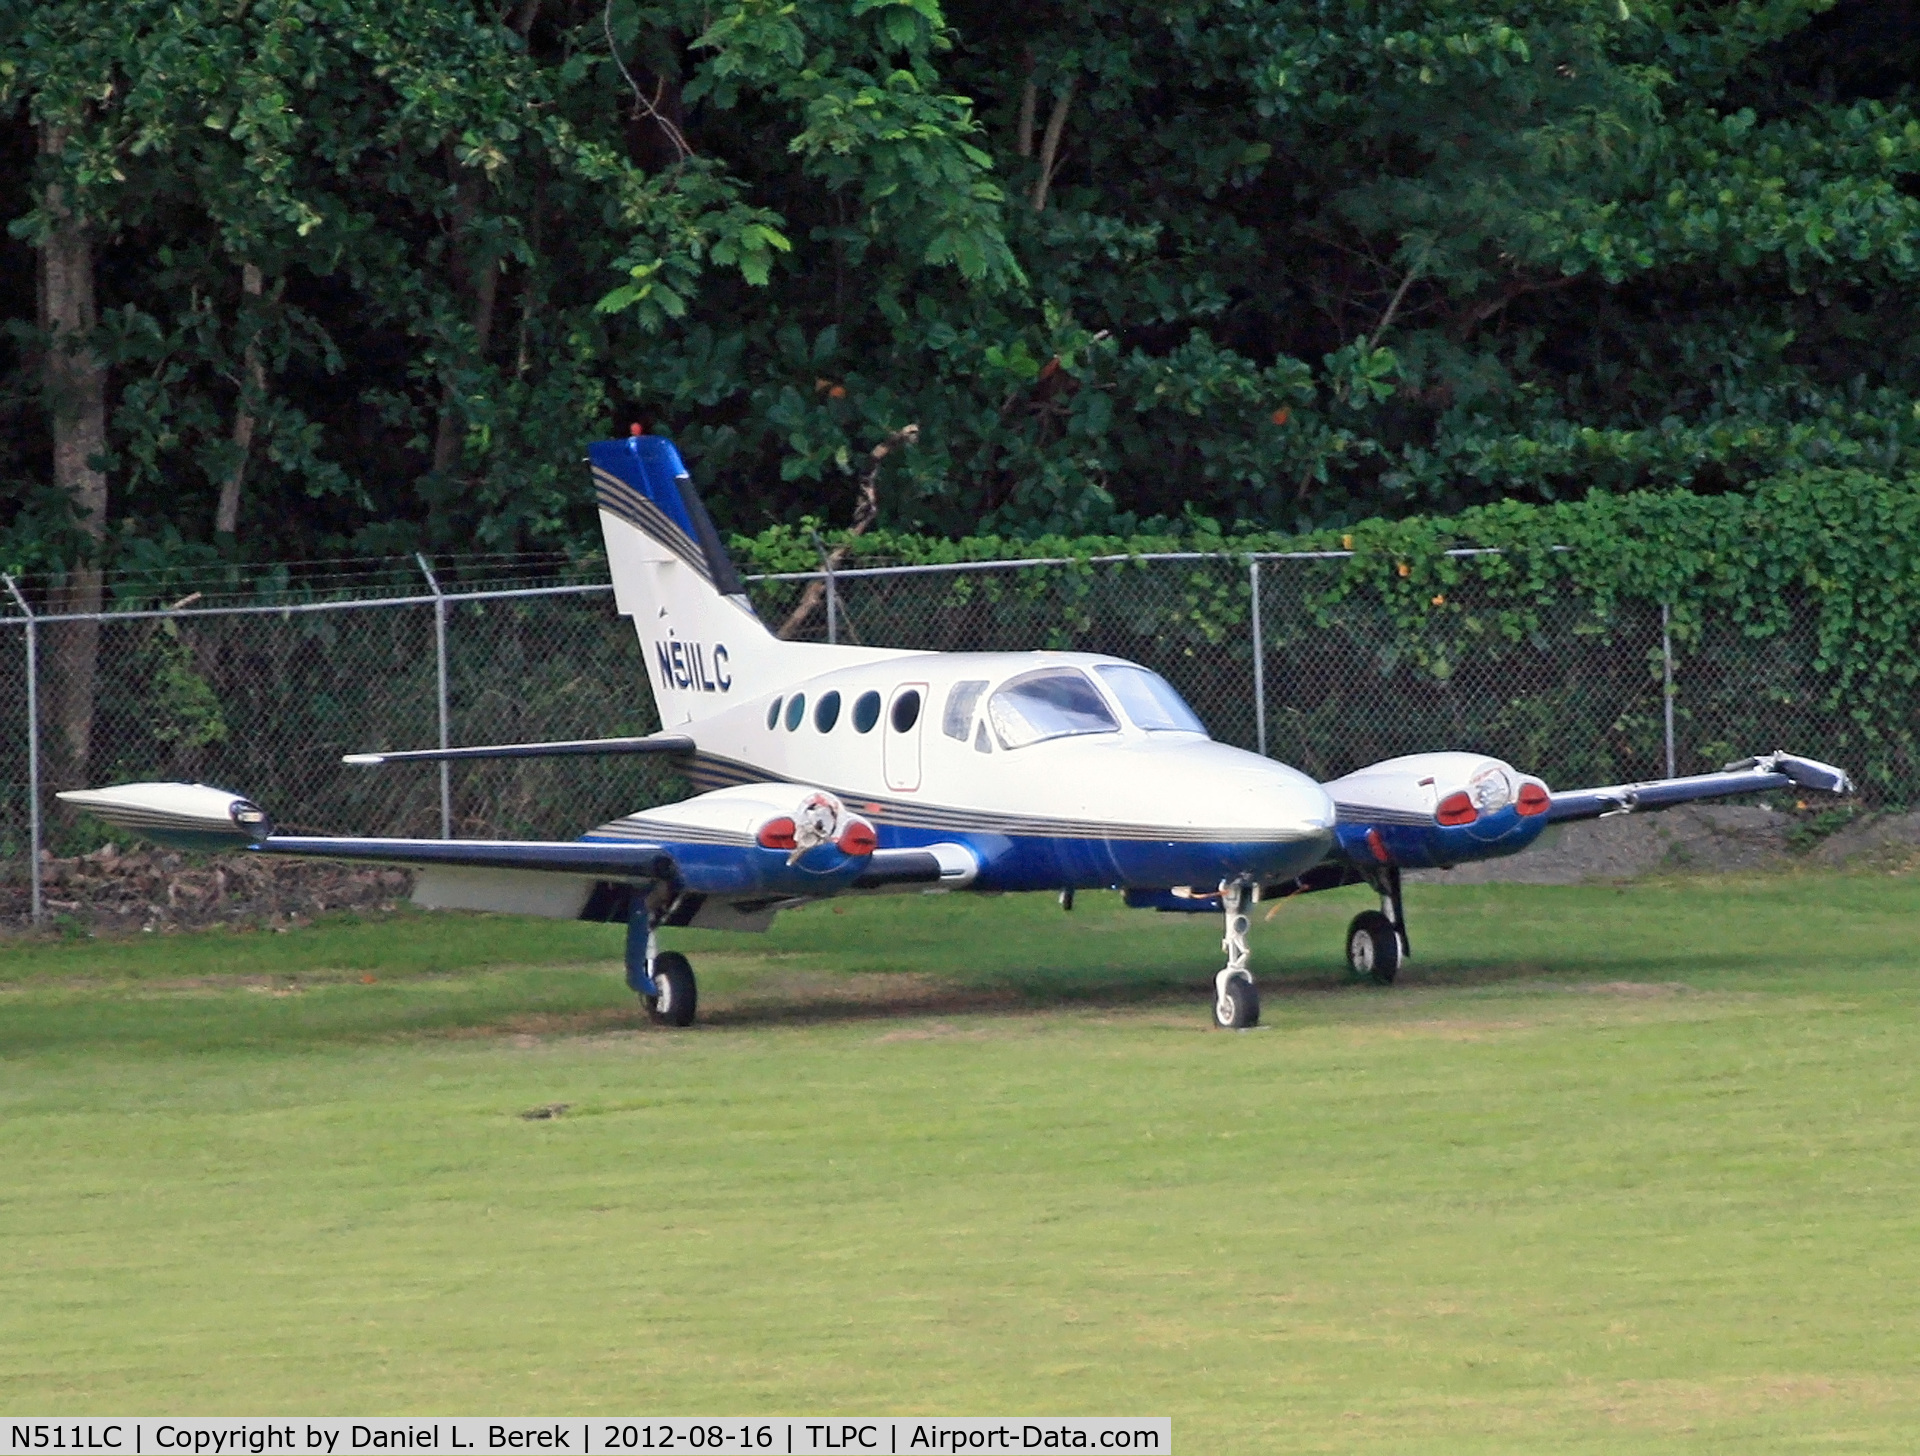 N511LC, 1973 Cessna 421B Golden Eagle C/N 421B0423, This poor Cessna Golden Eagle has never been quite the same since a landing accident on 11 April 2011, when a landing gear malfunction caused the plane to leave the runway, coming against a fence.